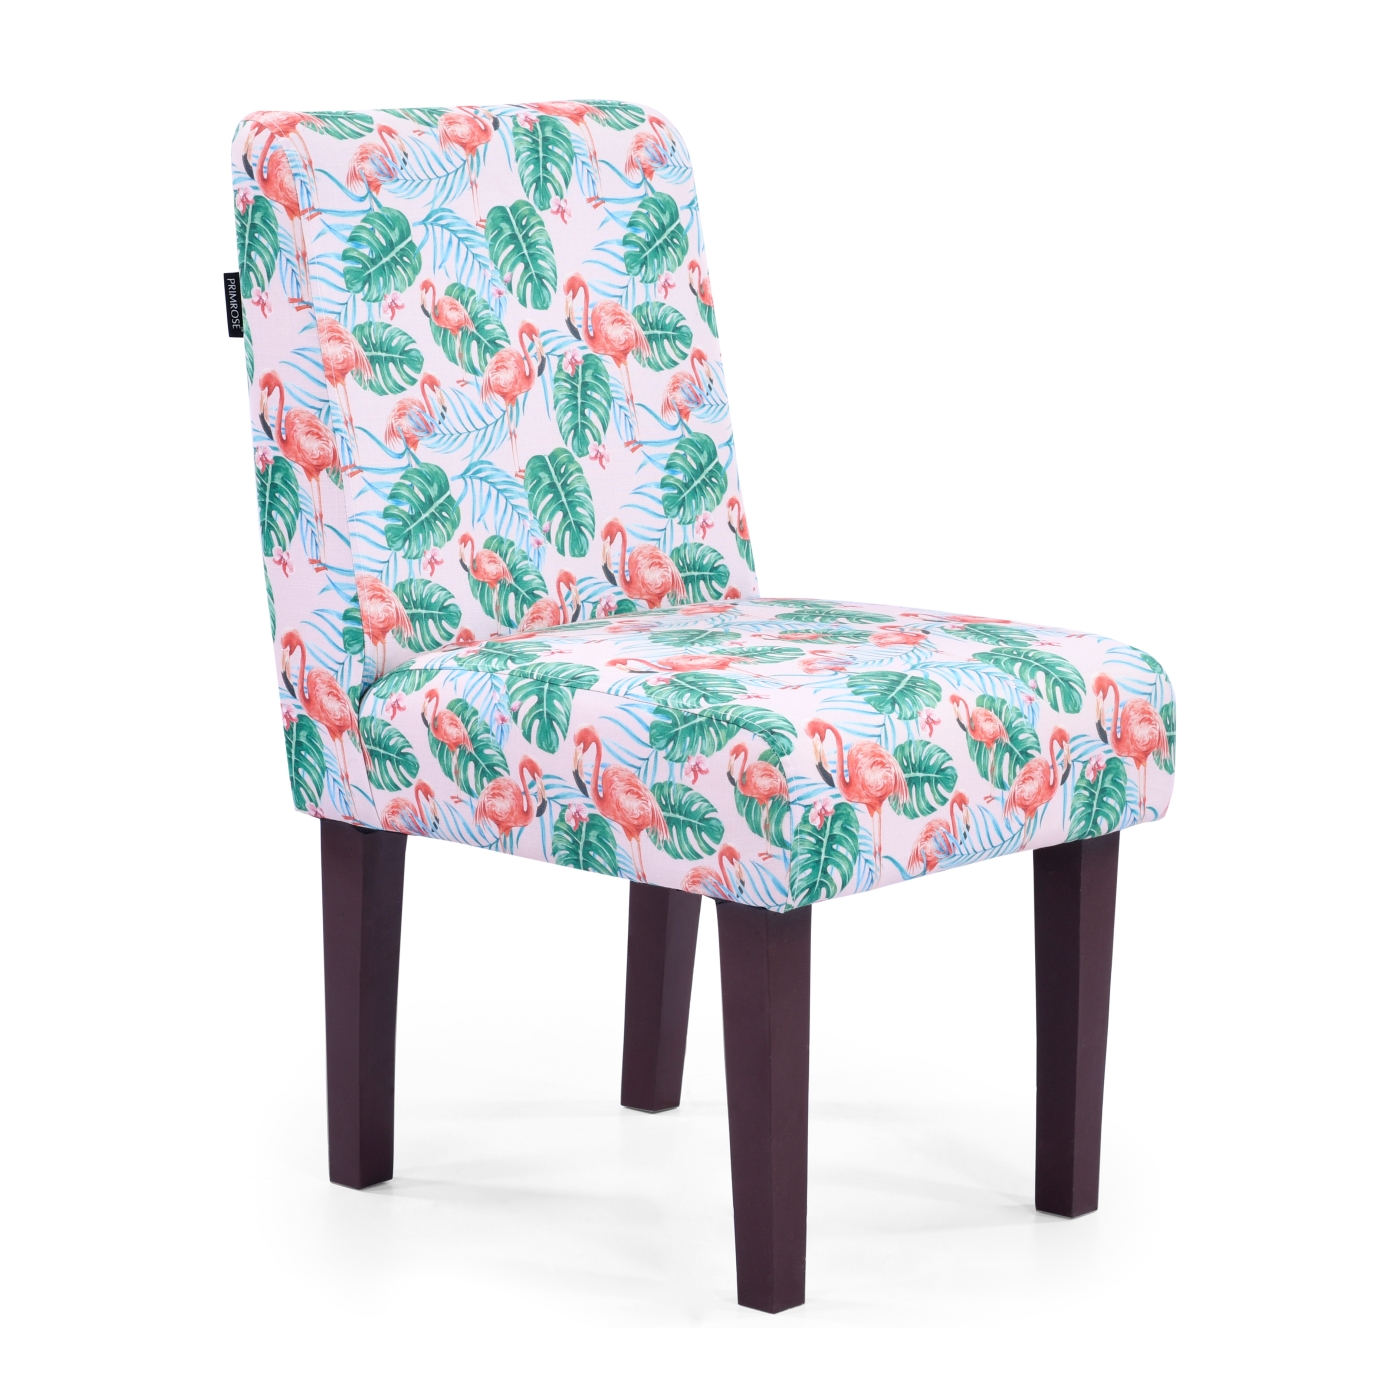 PRIMROSE Tropical Flamingo Digital Printed Faux Linen Fabric Dining Chair Combo (2 Chair+1 Ottoman) - Red, Green  